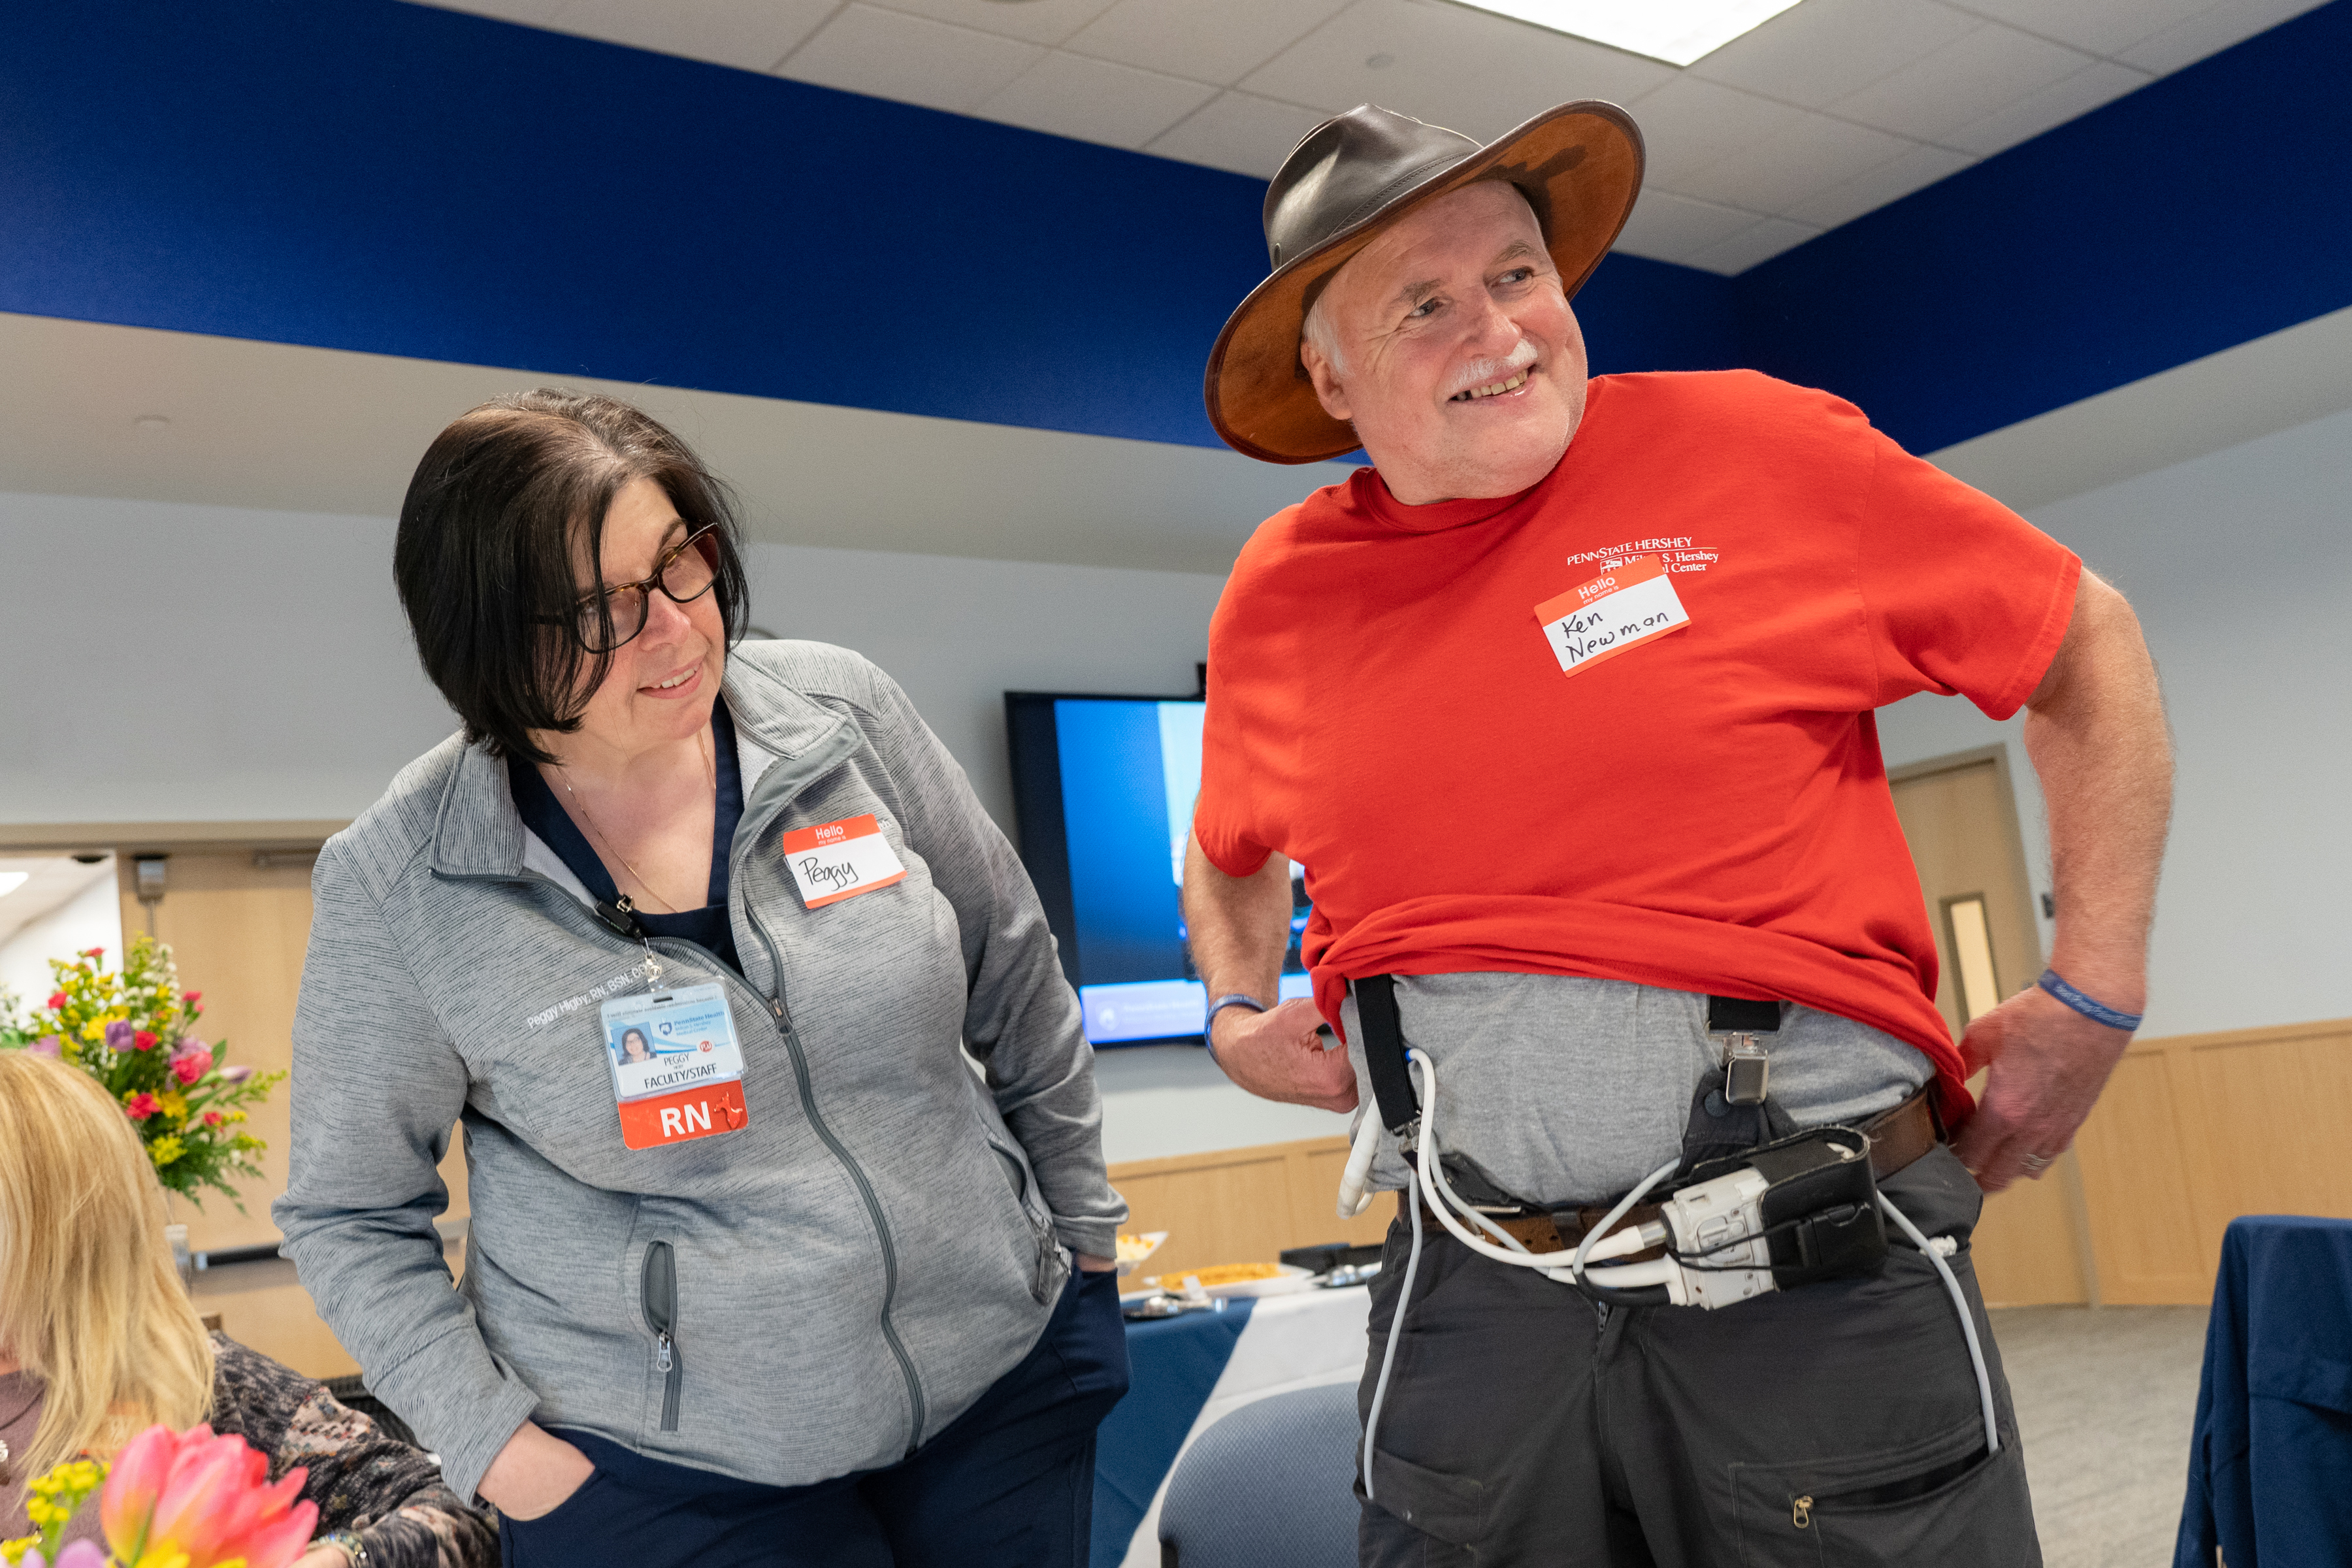 Ken Newman, right, holds up his shirt to show a HeartMate II LVAD attached to his belt. He is wearing a hat, a nametag and has a gray moustache. Peggy Higby, the LVAD and heart transplant manager, stands next to him. She is wearing glasses and is wearing a sweat jacket with a nametag and an RN badge.